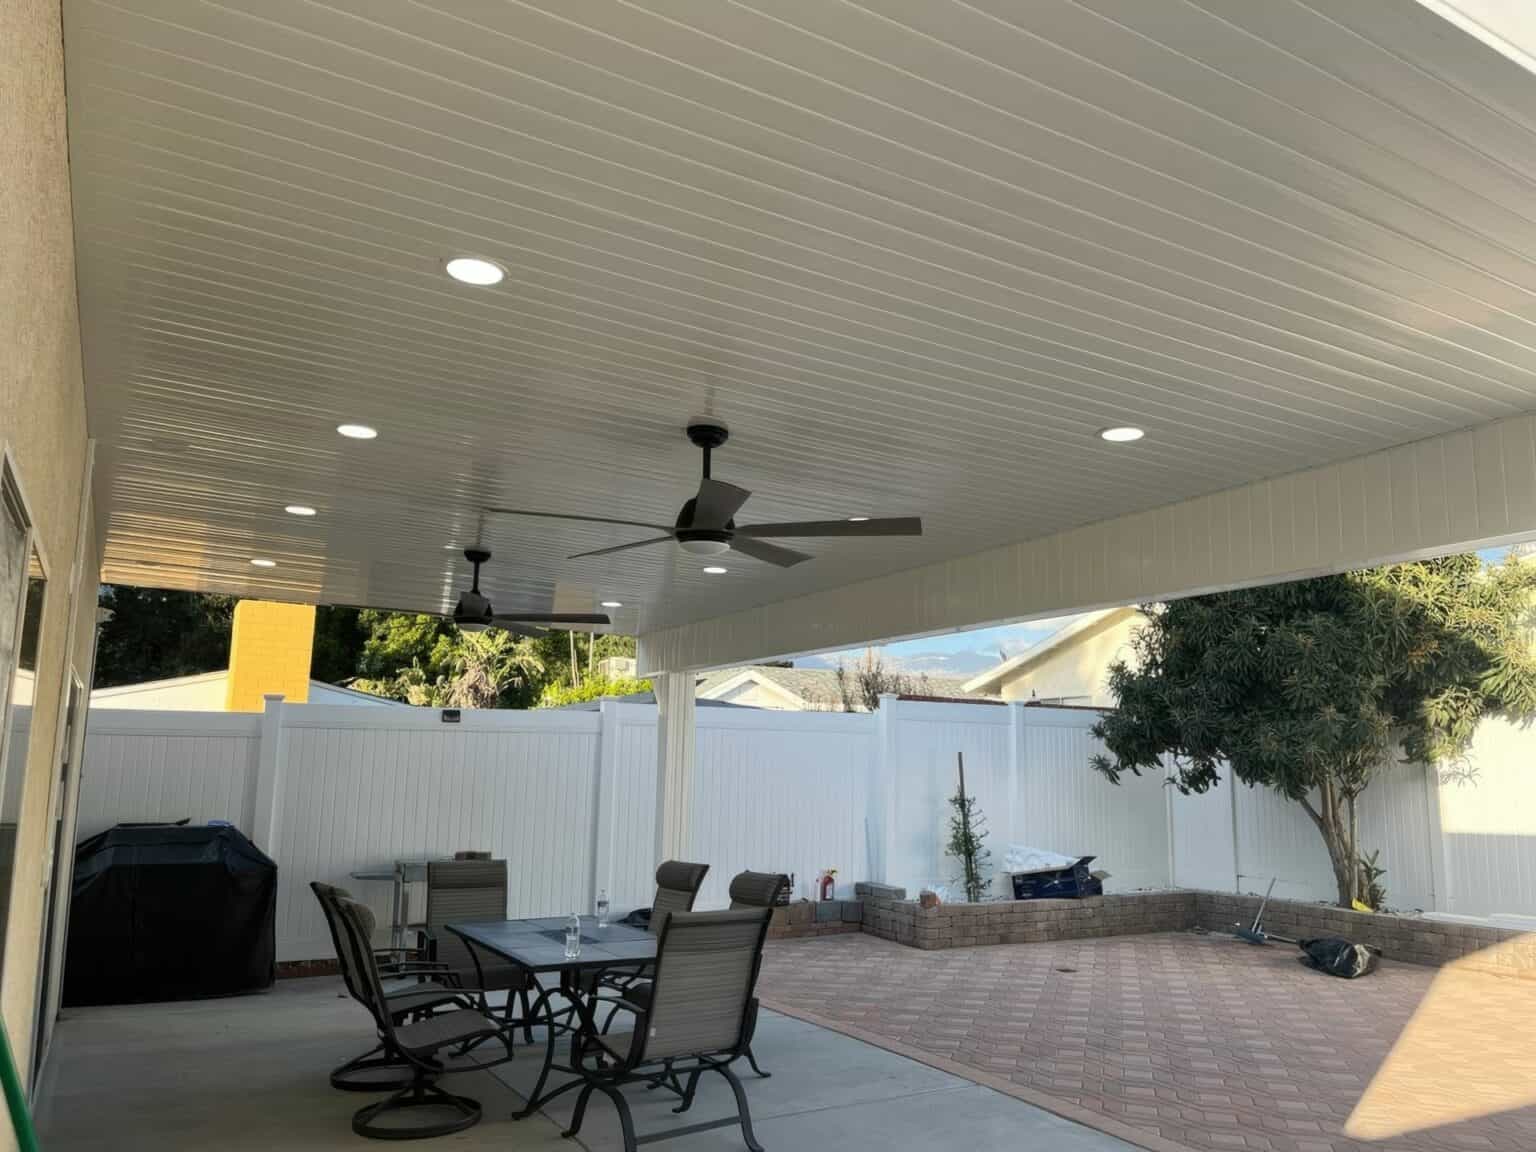 Outdoor furniture vinyl patio cover, ceiling fan, table & chairs, brick floor, and vinyl fence, creating a cozy outdoor oasis.